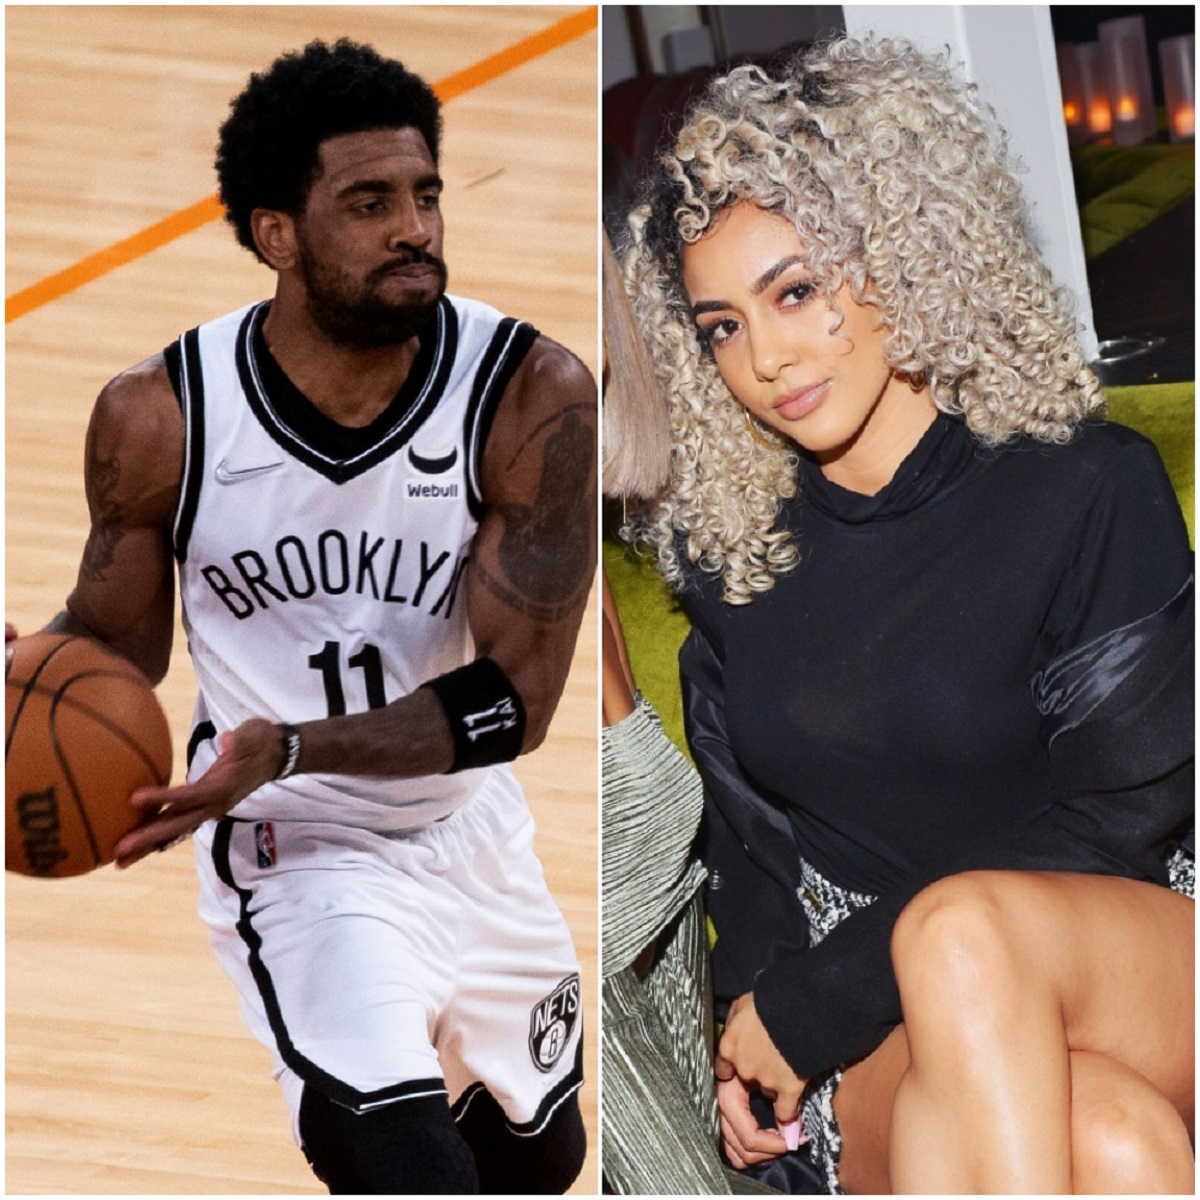 (L): Kyrie Irving dribbling the ball in a game against the New York Knicks, (R): Kyrie Irving's partner, Marlene 'Golden' Wilkerson, poses for a photo at an event in West Hollywood